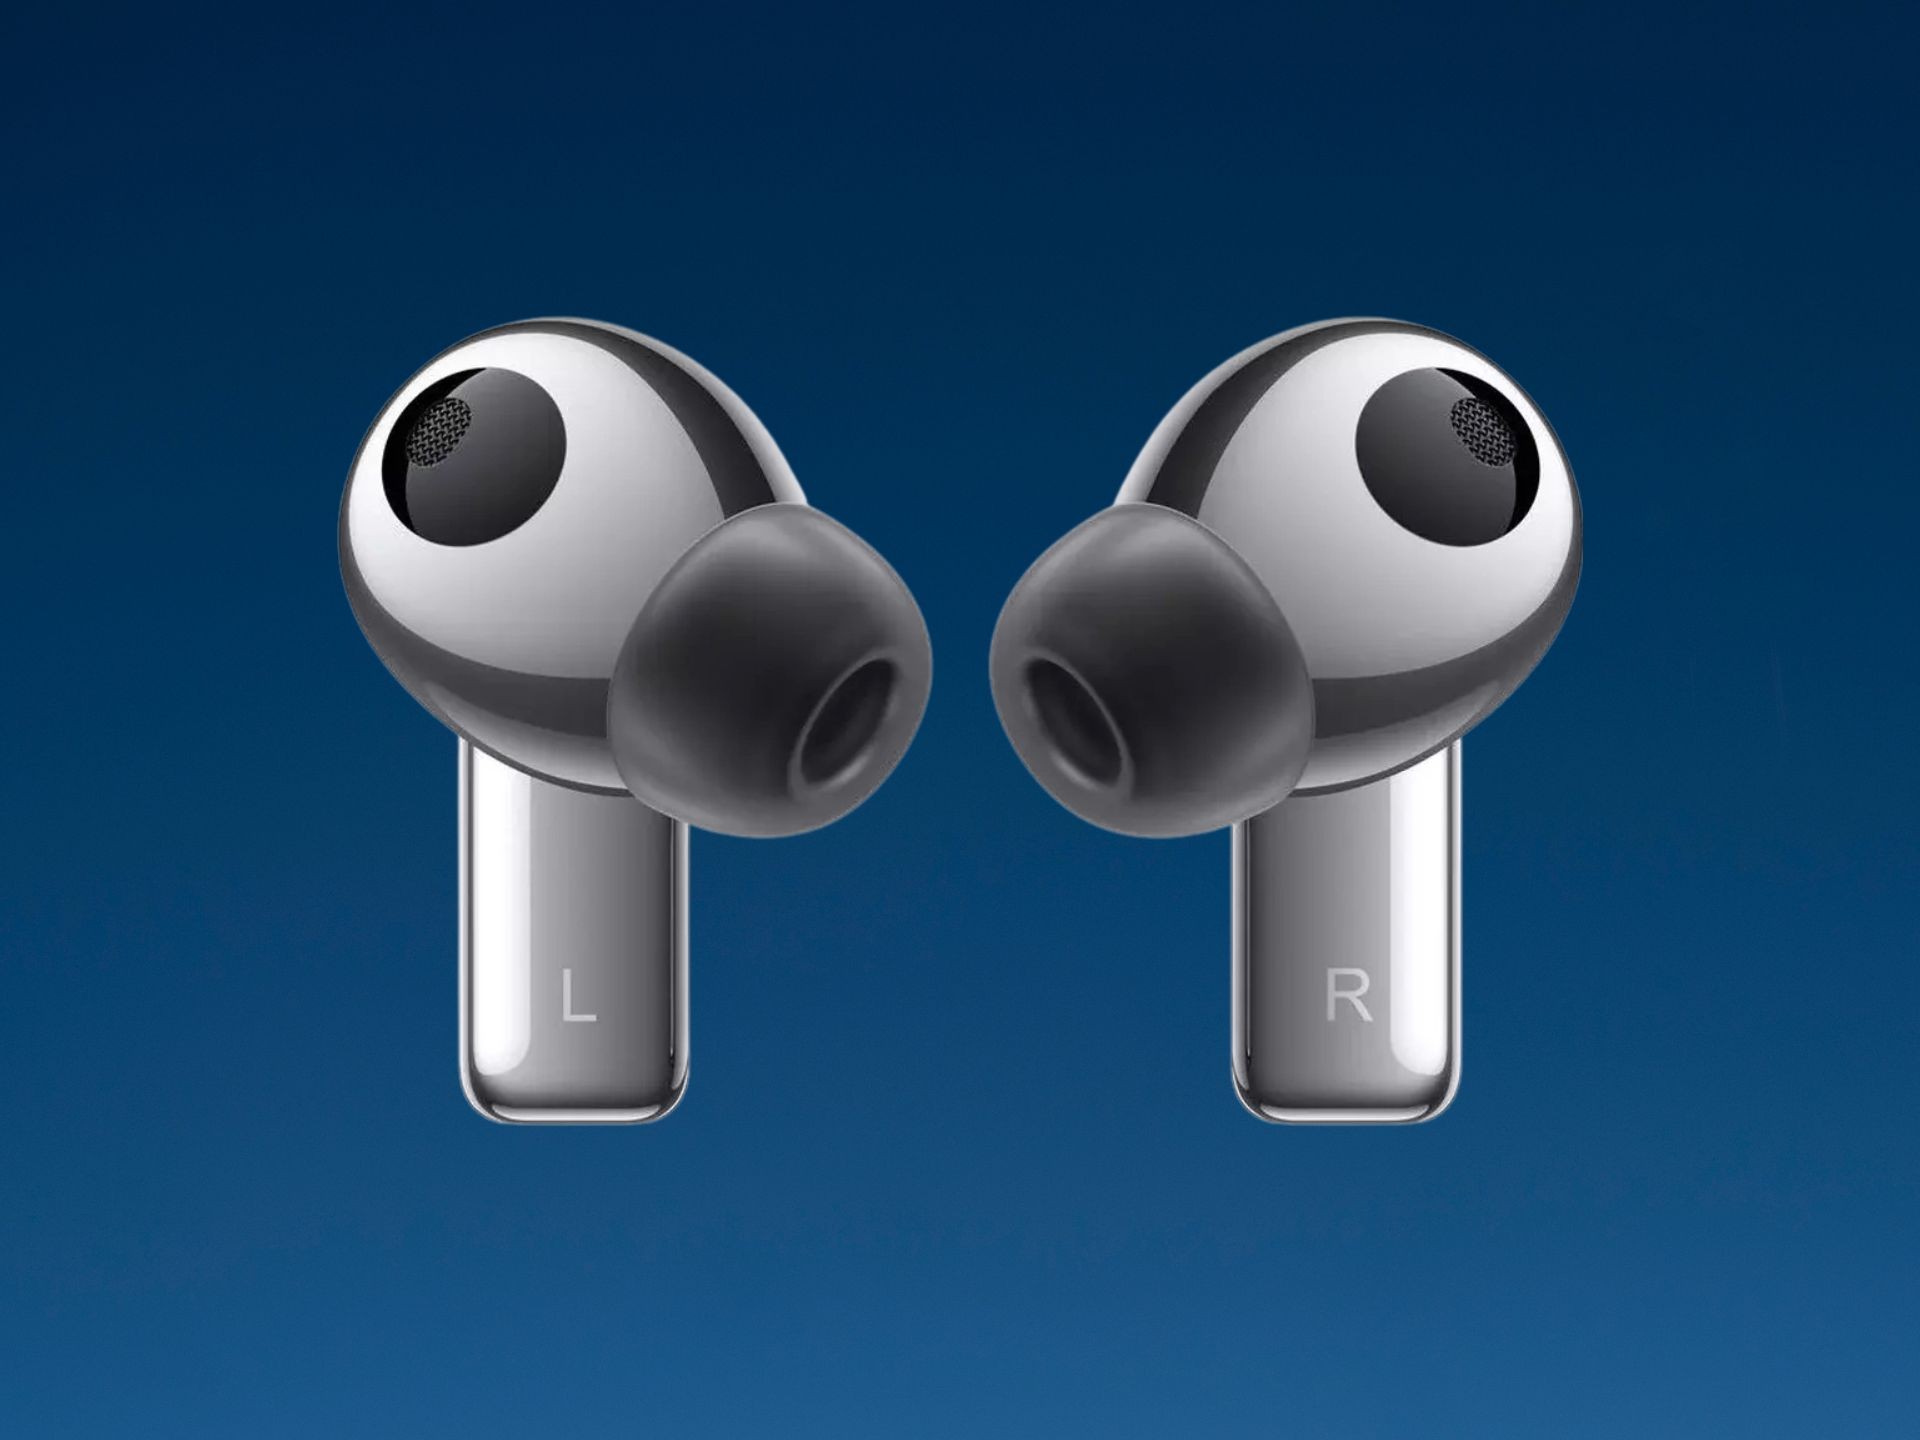 Will the HUAWEI FreeBuds Pro 2 be an AirPods Pro killer?